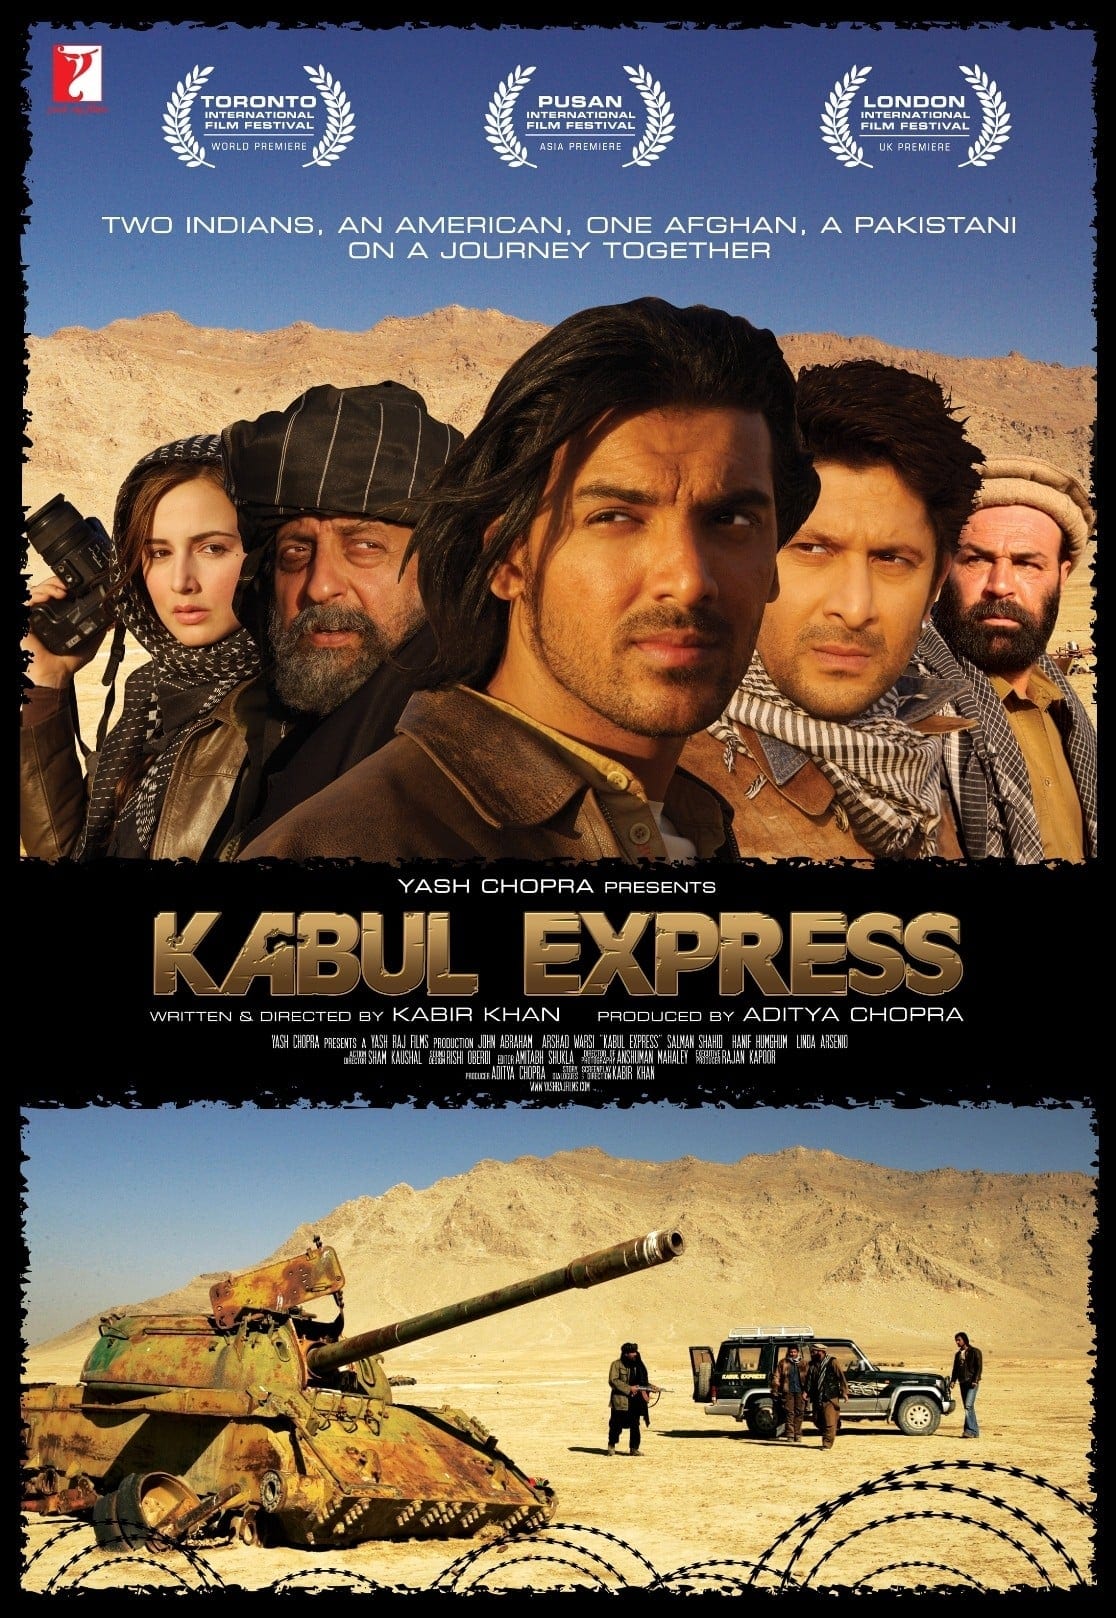 Poster for the movie "Kabul Express"